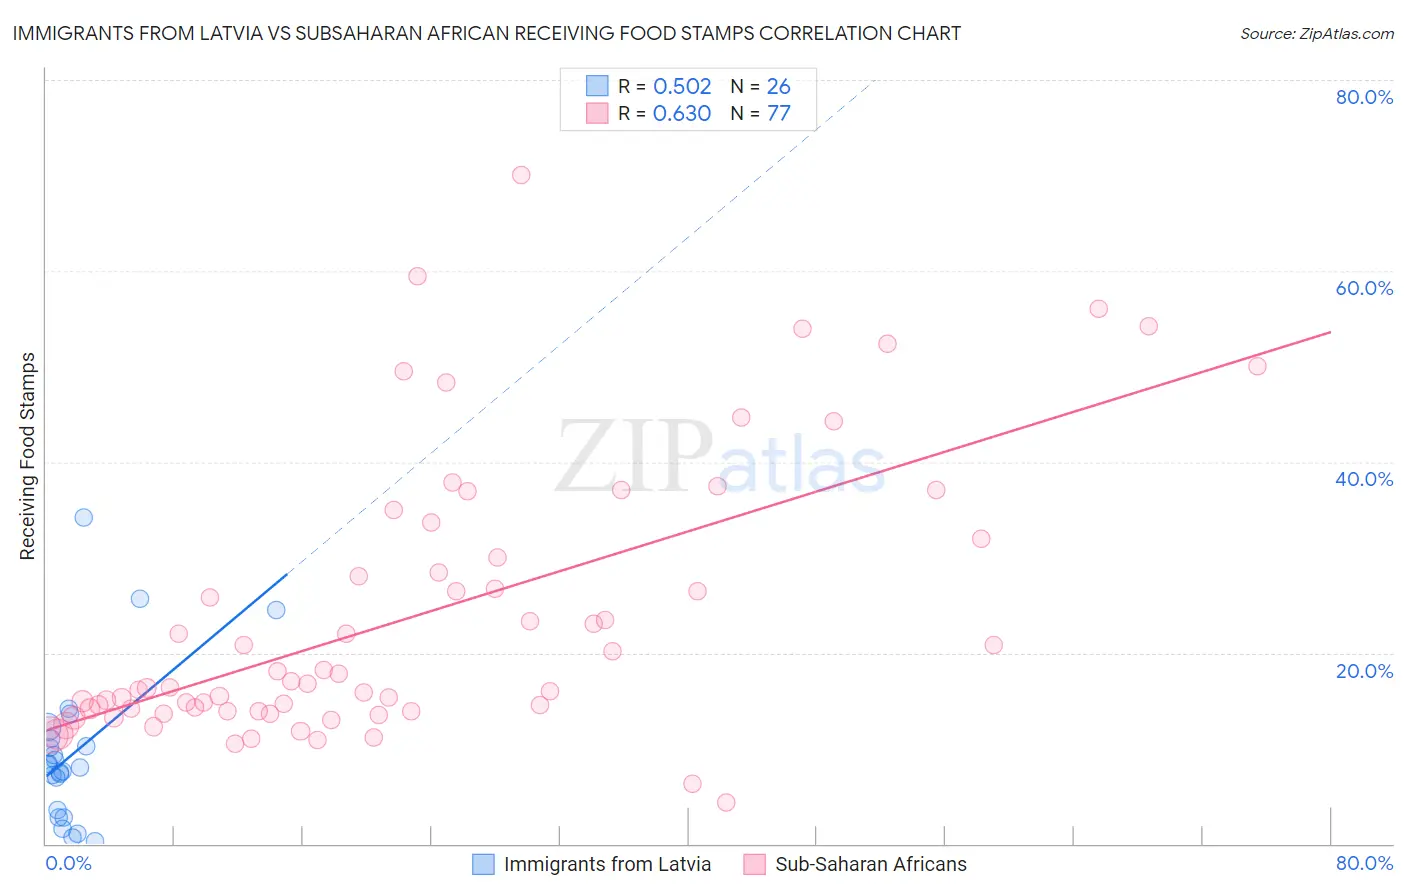 Immigrants from Latvia vs Subsaharan African Receiving Food Stamps